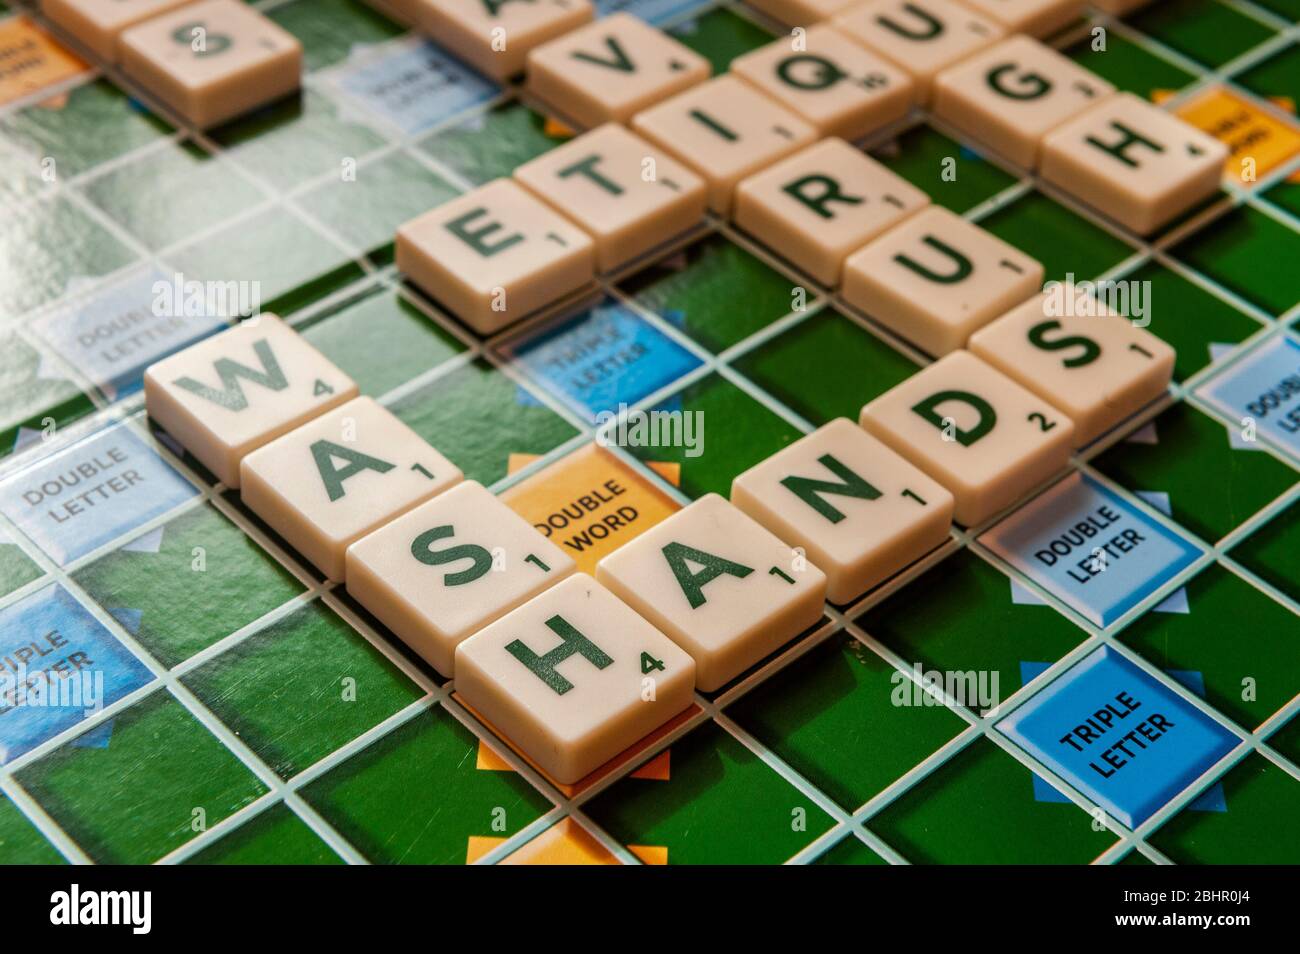 Words on a Scrabble board relating to the Coronavirus/Covid-19 pandemic with 'Wash Hands' in focus. Stock Photo